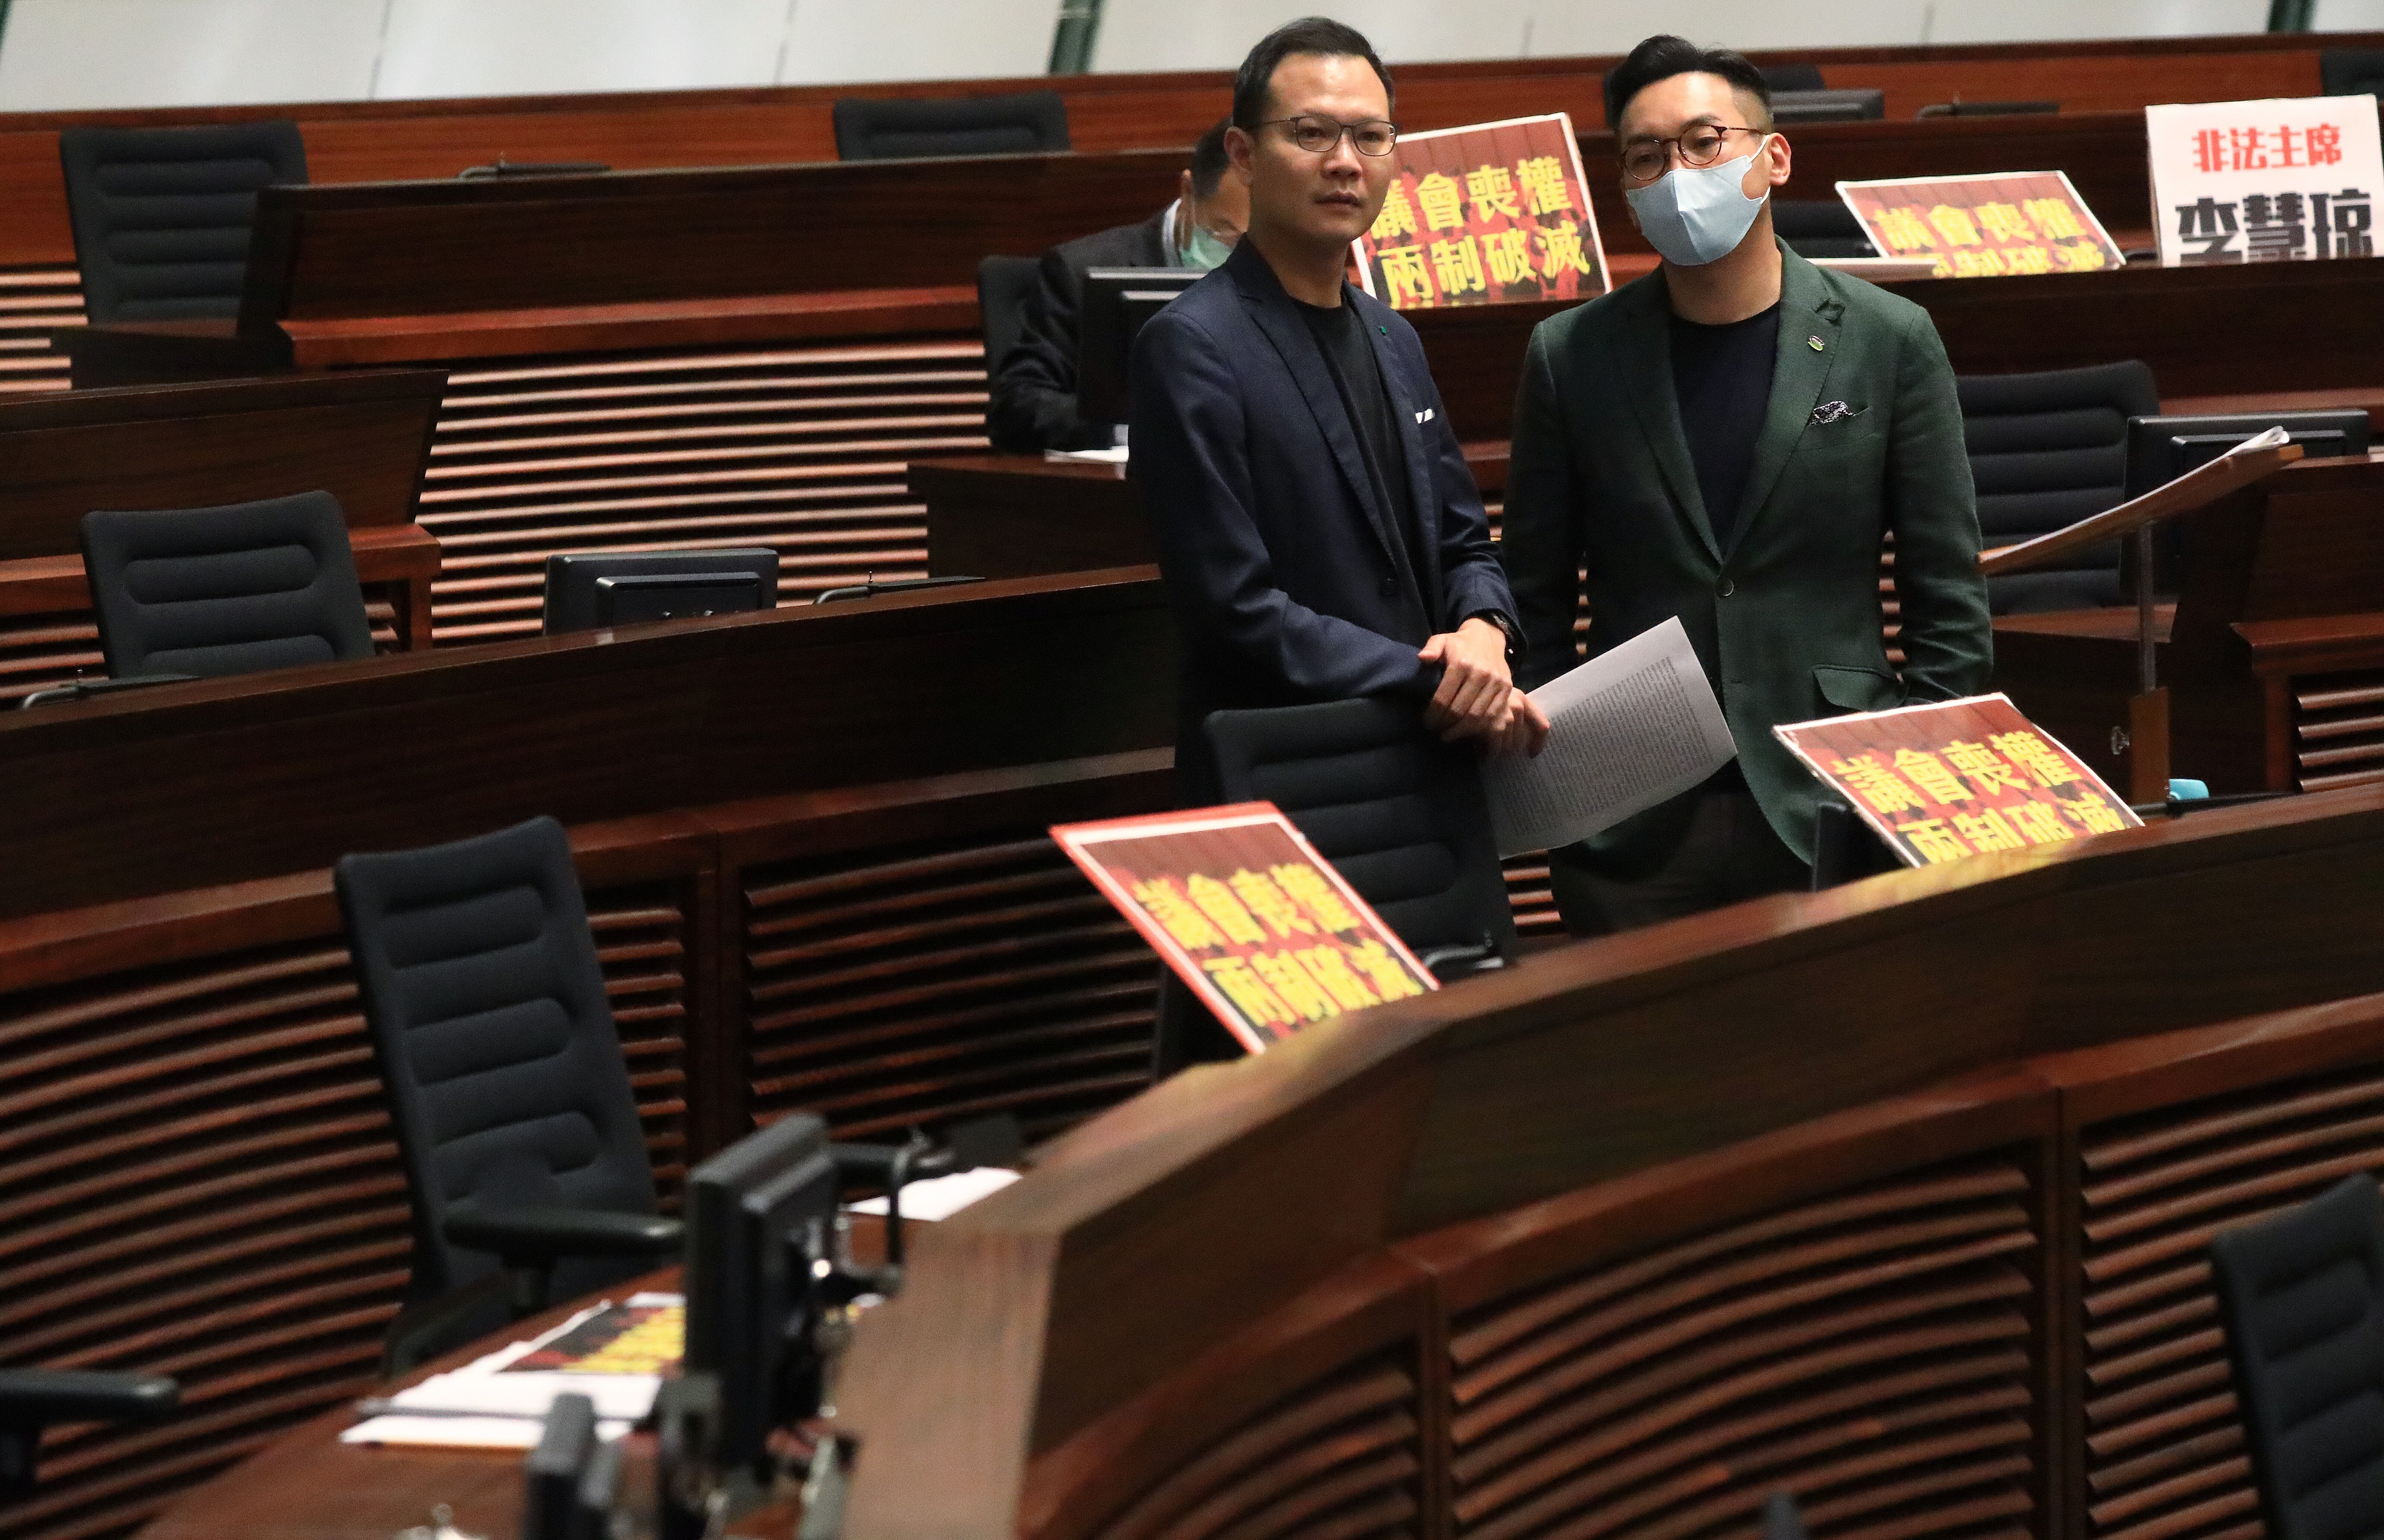 Pan-democrat lawmakers Dennis Kwok (left) and Alvin Yeung have been barred from running in the next Legislative Council polls and may not even be able to retain their seats in a caretaker version of Legco. Photo: May Tse